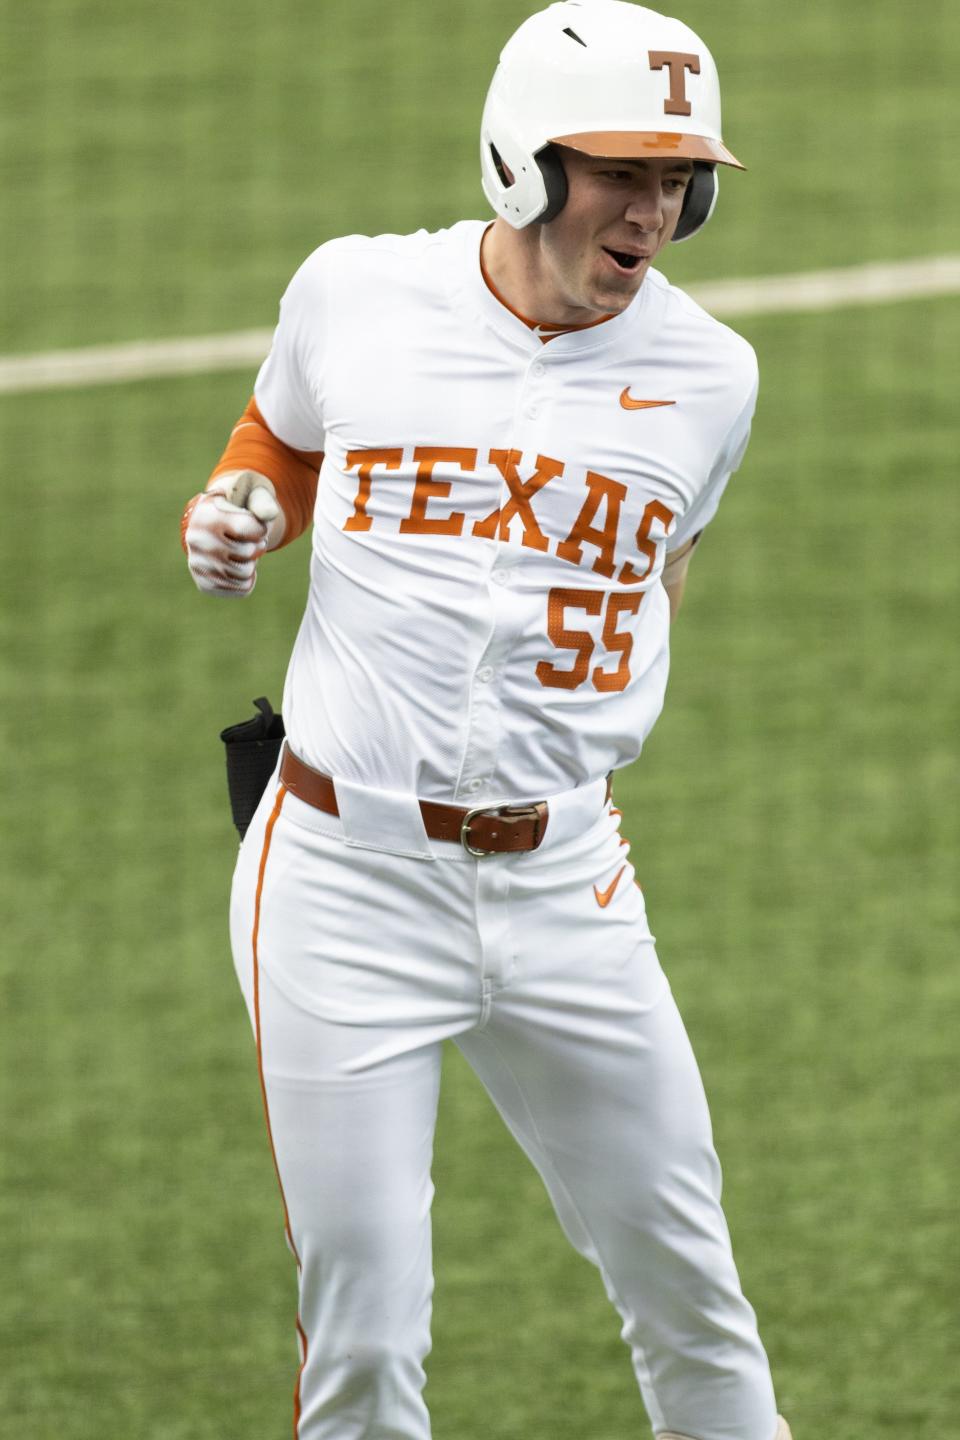 Texas outfielder Casey Cummings celebrates after hitting a home run during the annual Texas Alumni baseball game on Saturday. The Texas team beat the alumni 7-4. The Longhorns open their season on Feb. 16.